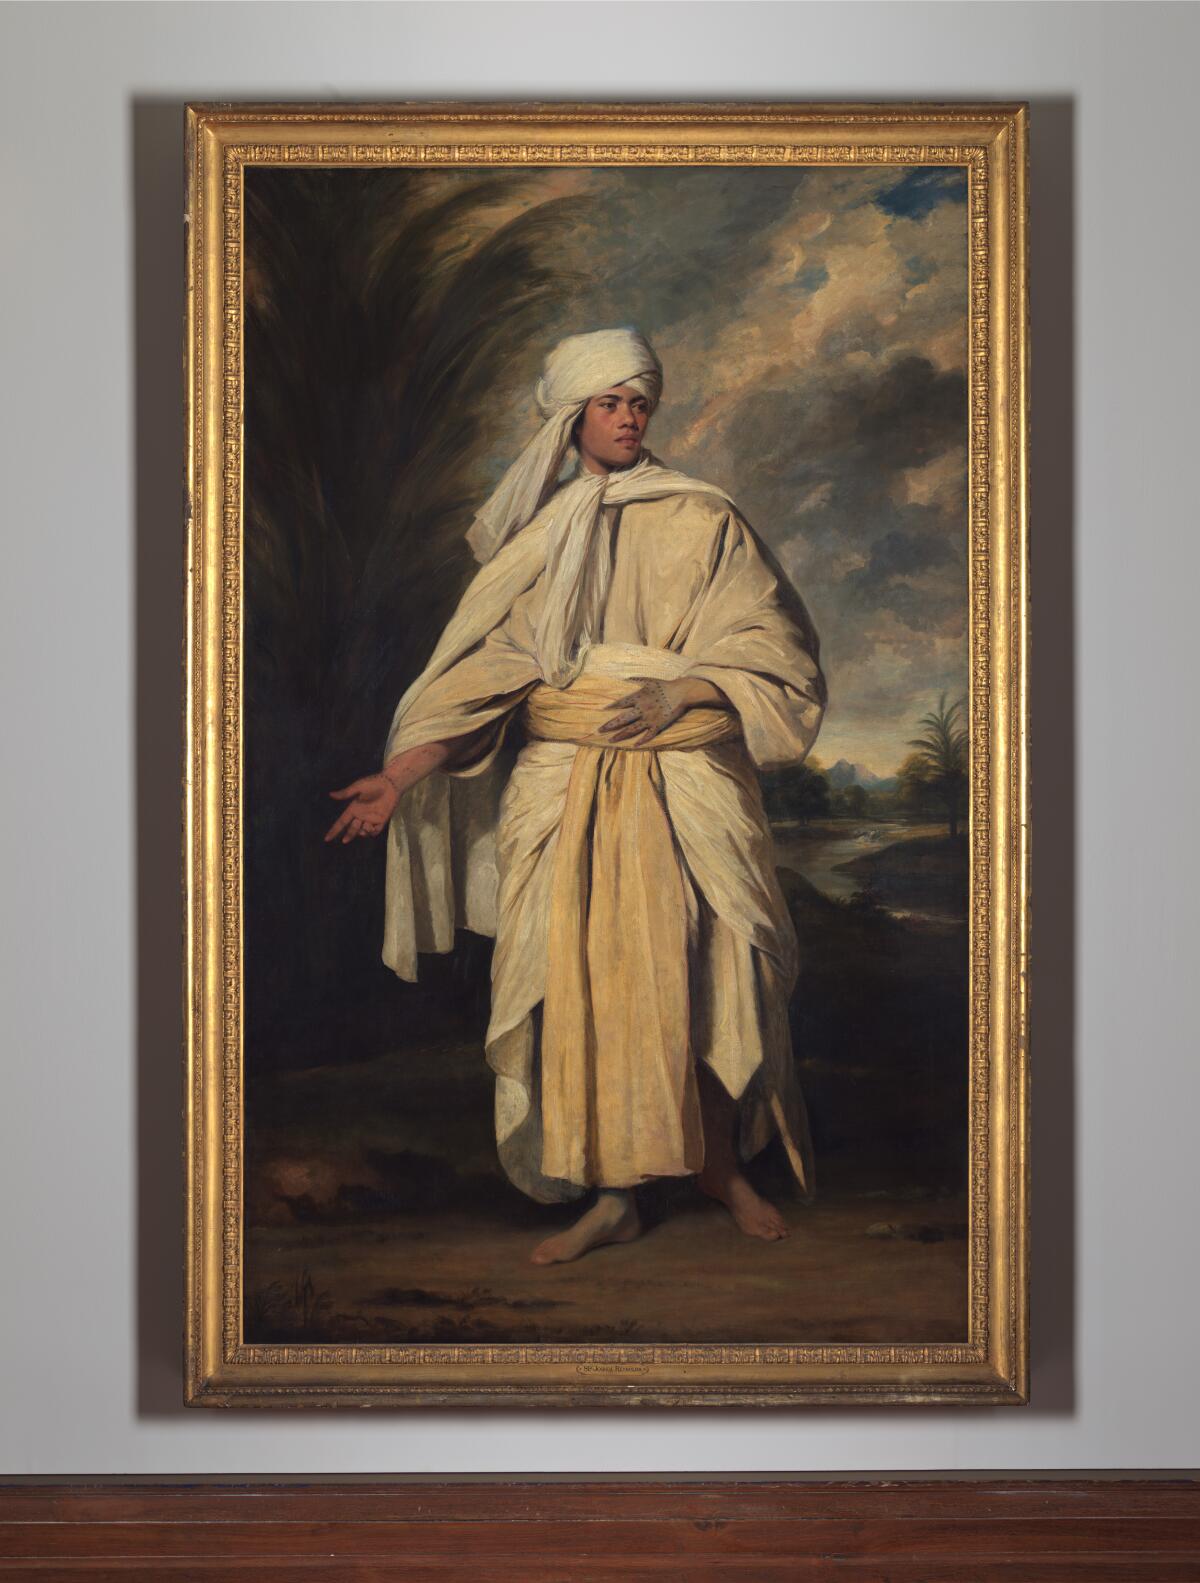 Sir Joshua Reynolds' oil painting "Portrait of Mai (Omai)," a man in a white turban and flowing light robes, circa 1776